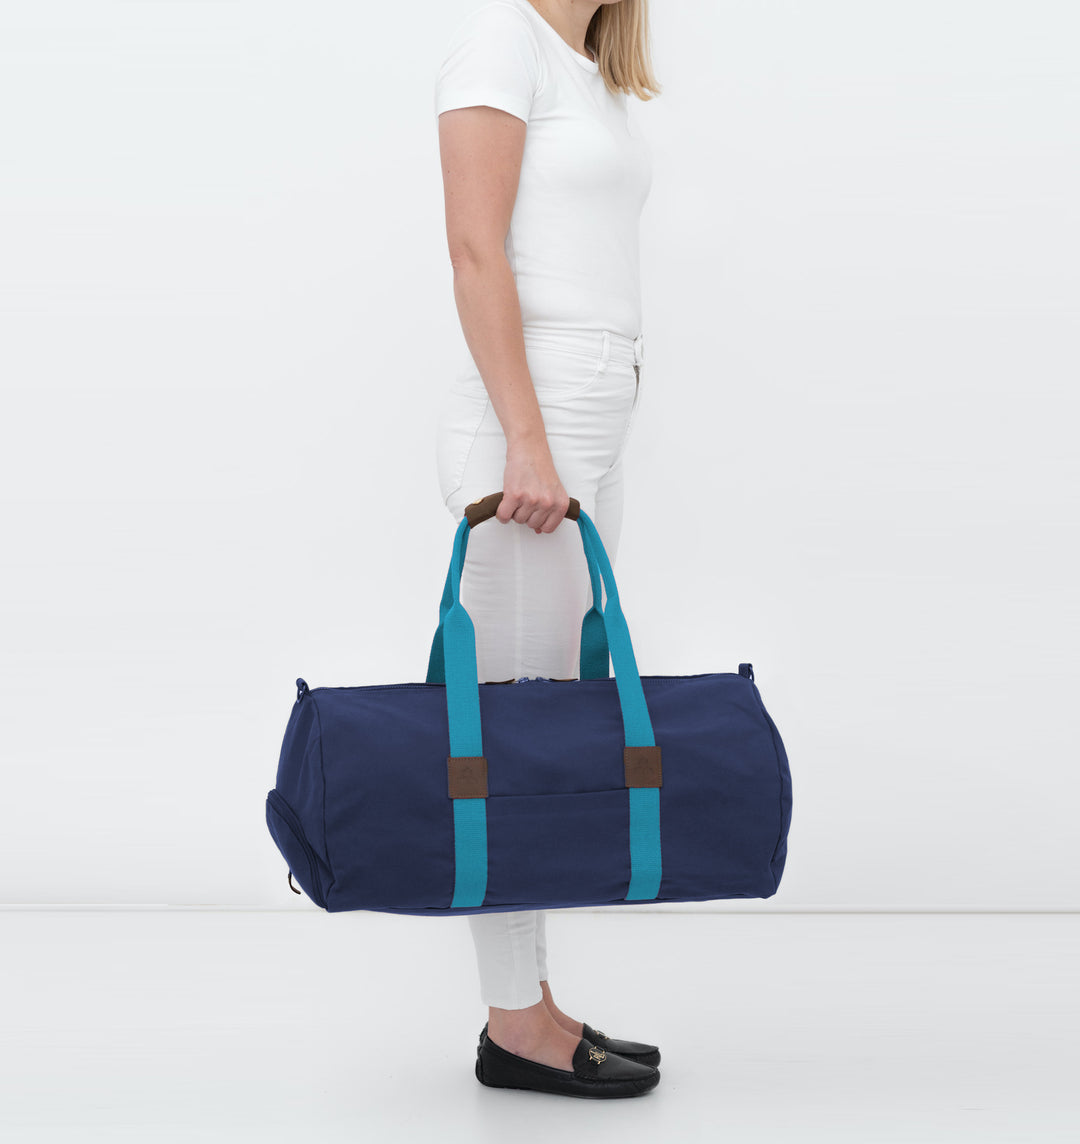 Duffle bag -M- NAVY with turquoise strap